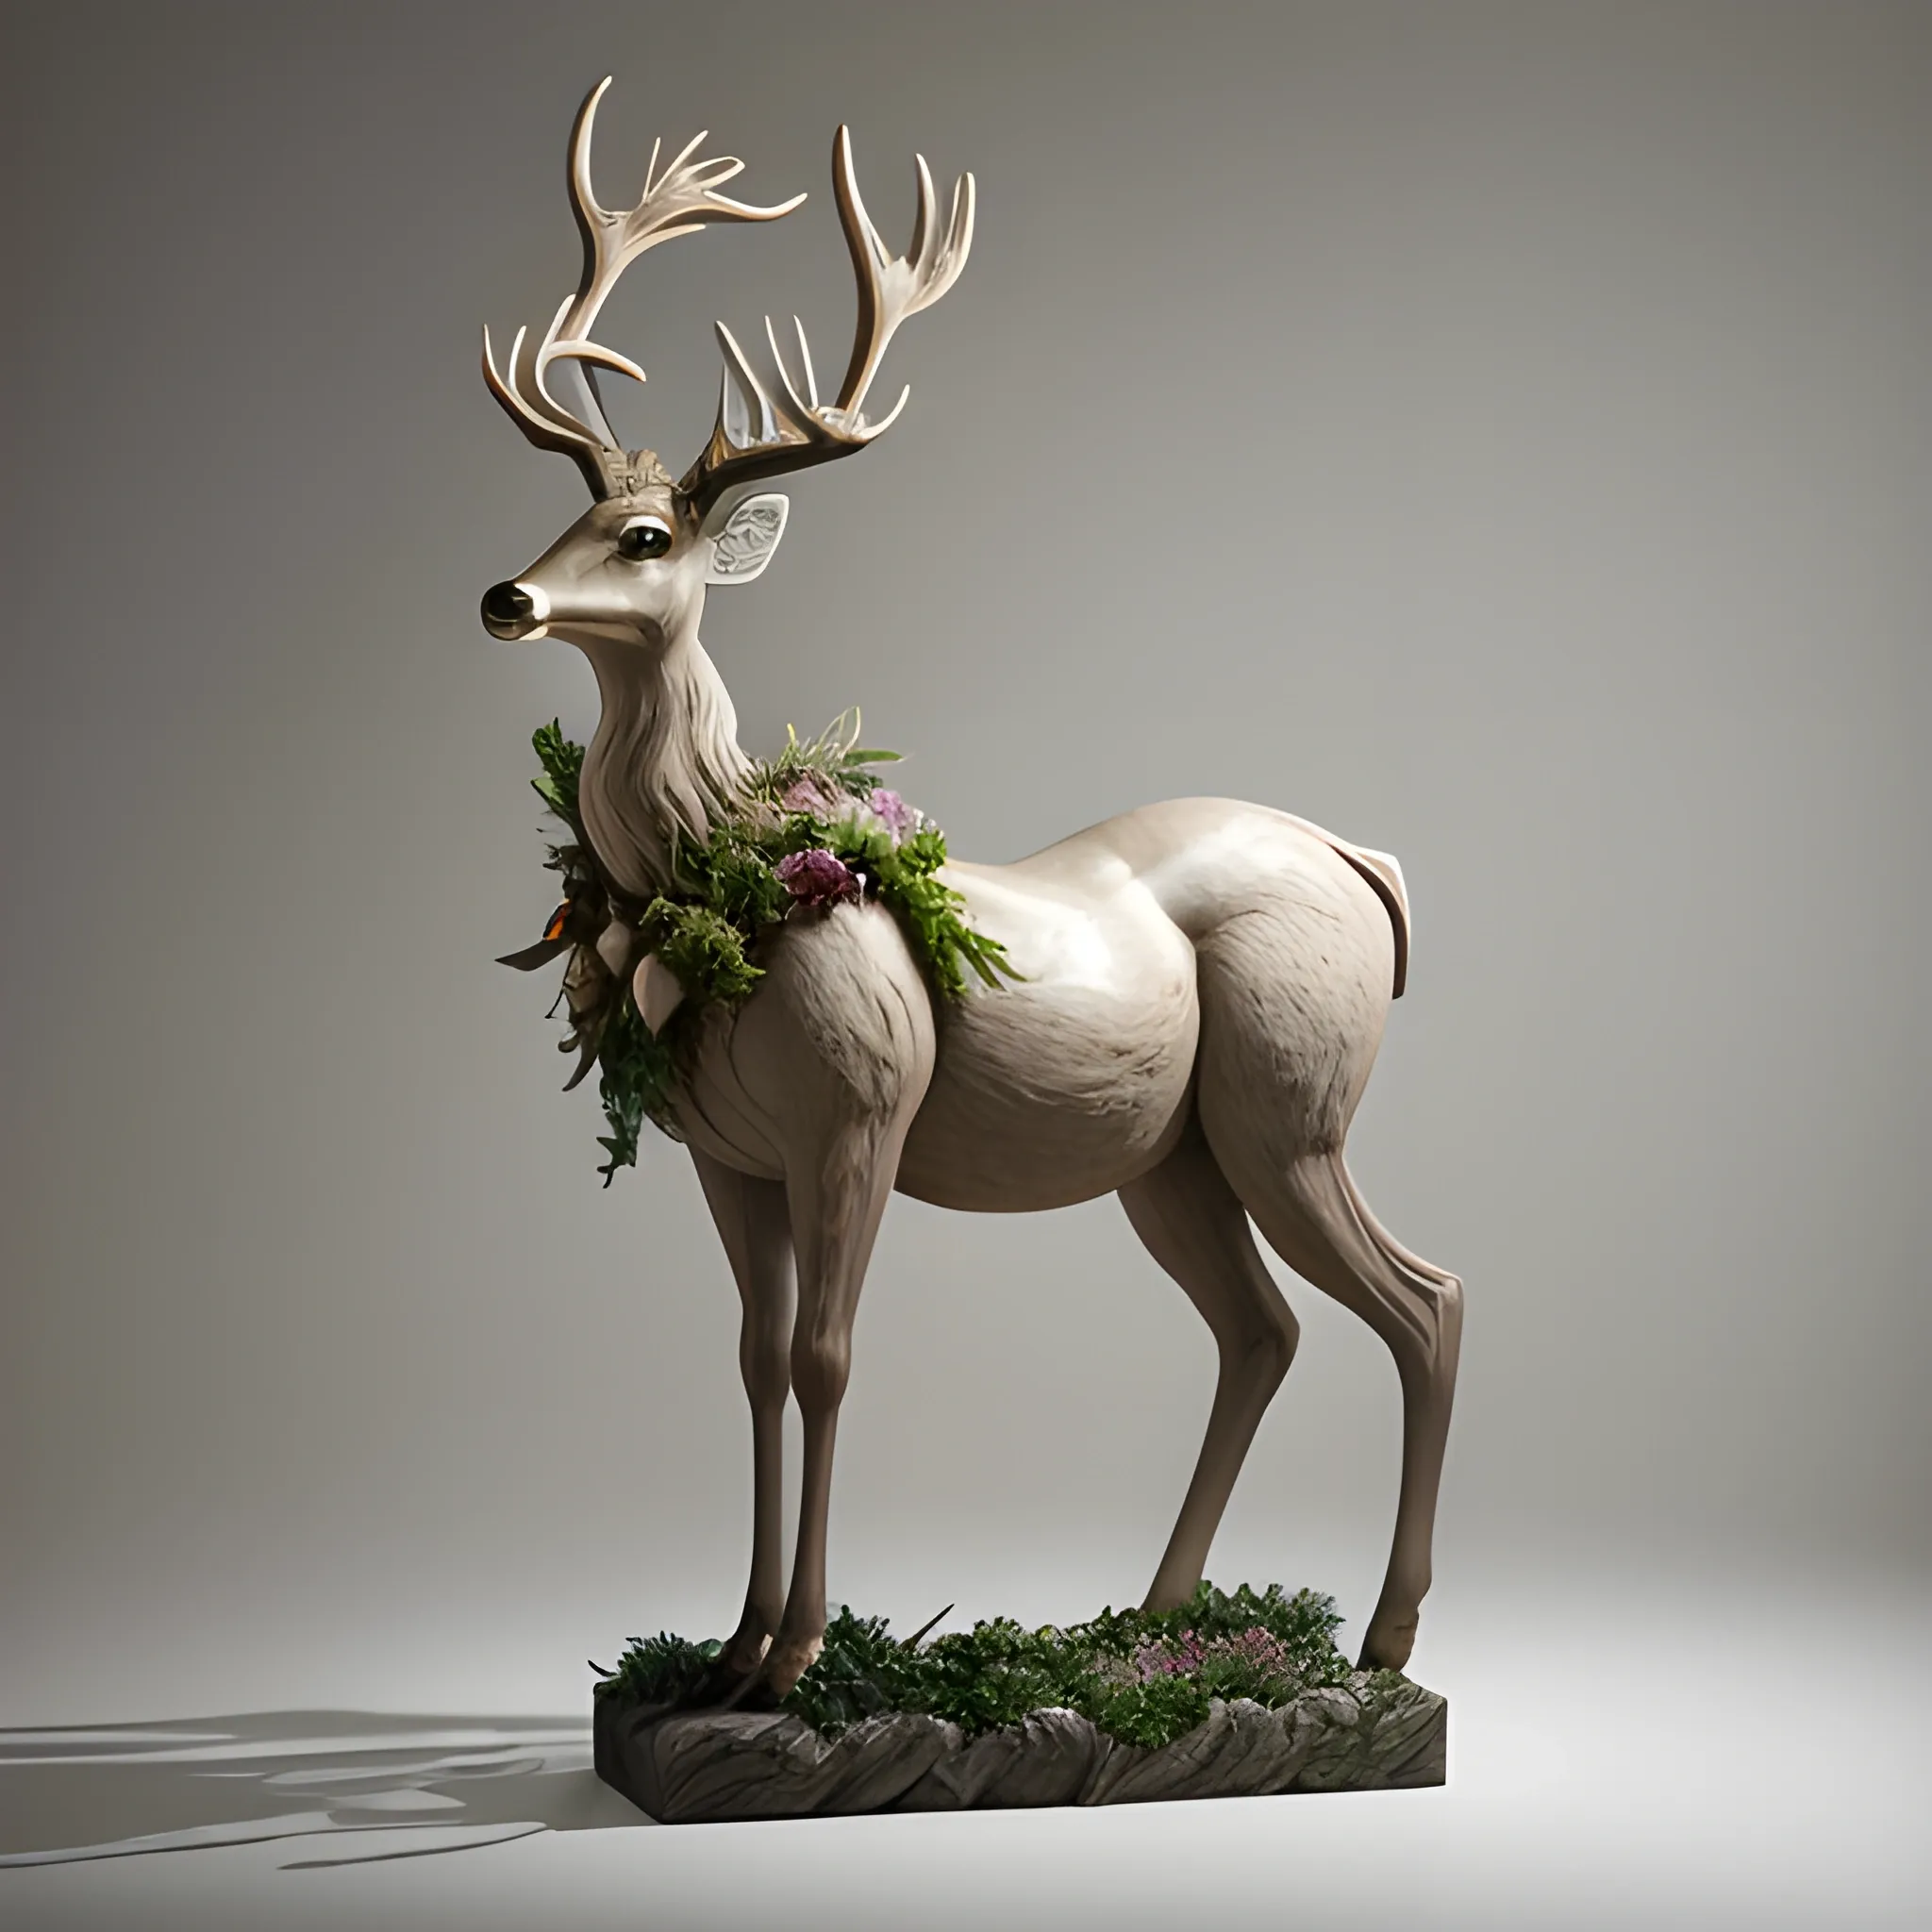 "A hyperrealistic and stylized sculpture that represents a female goddess of deer and plants, mounted on a creature that fuses the elegance of the deer with the strength of the horse, created by a prodigious contemporary sculptor of the 21st century."